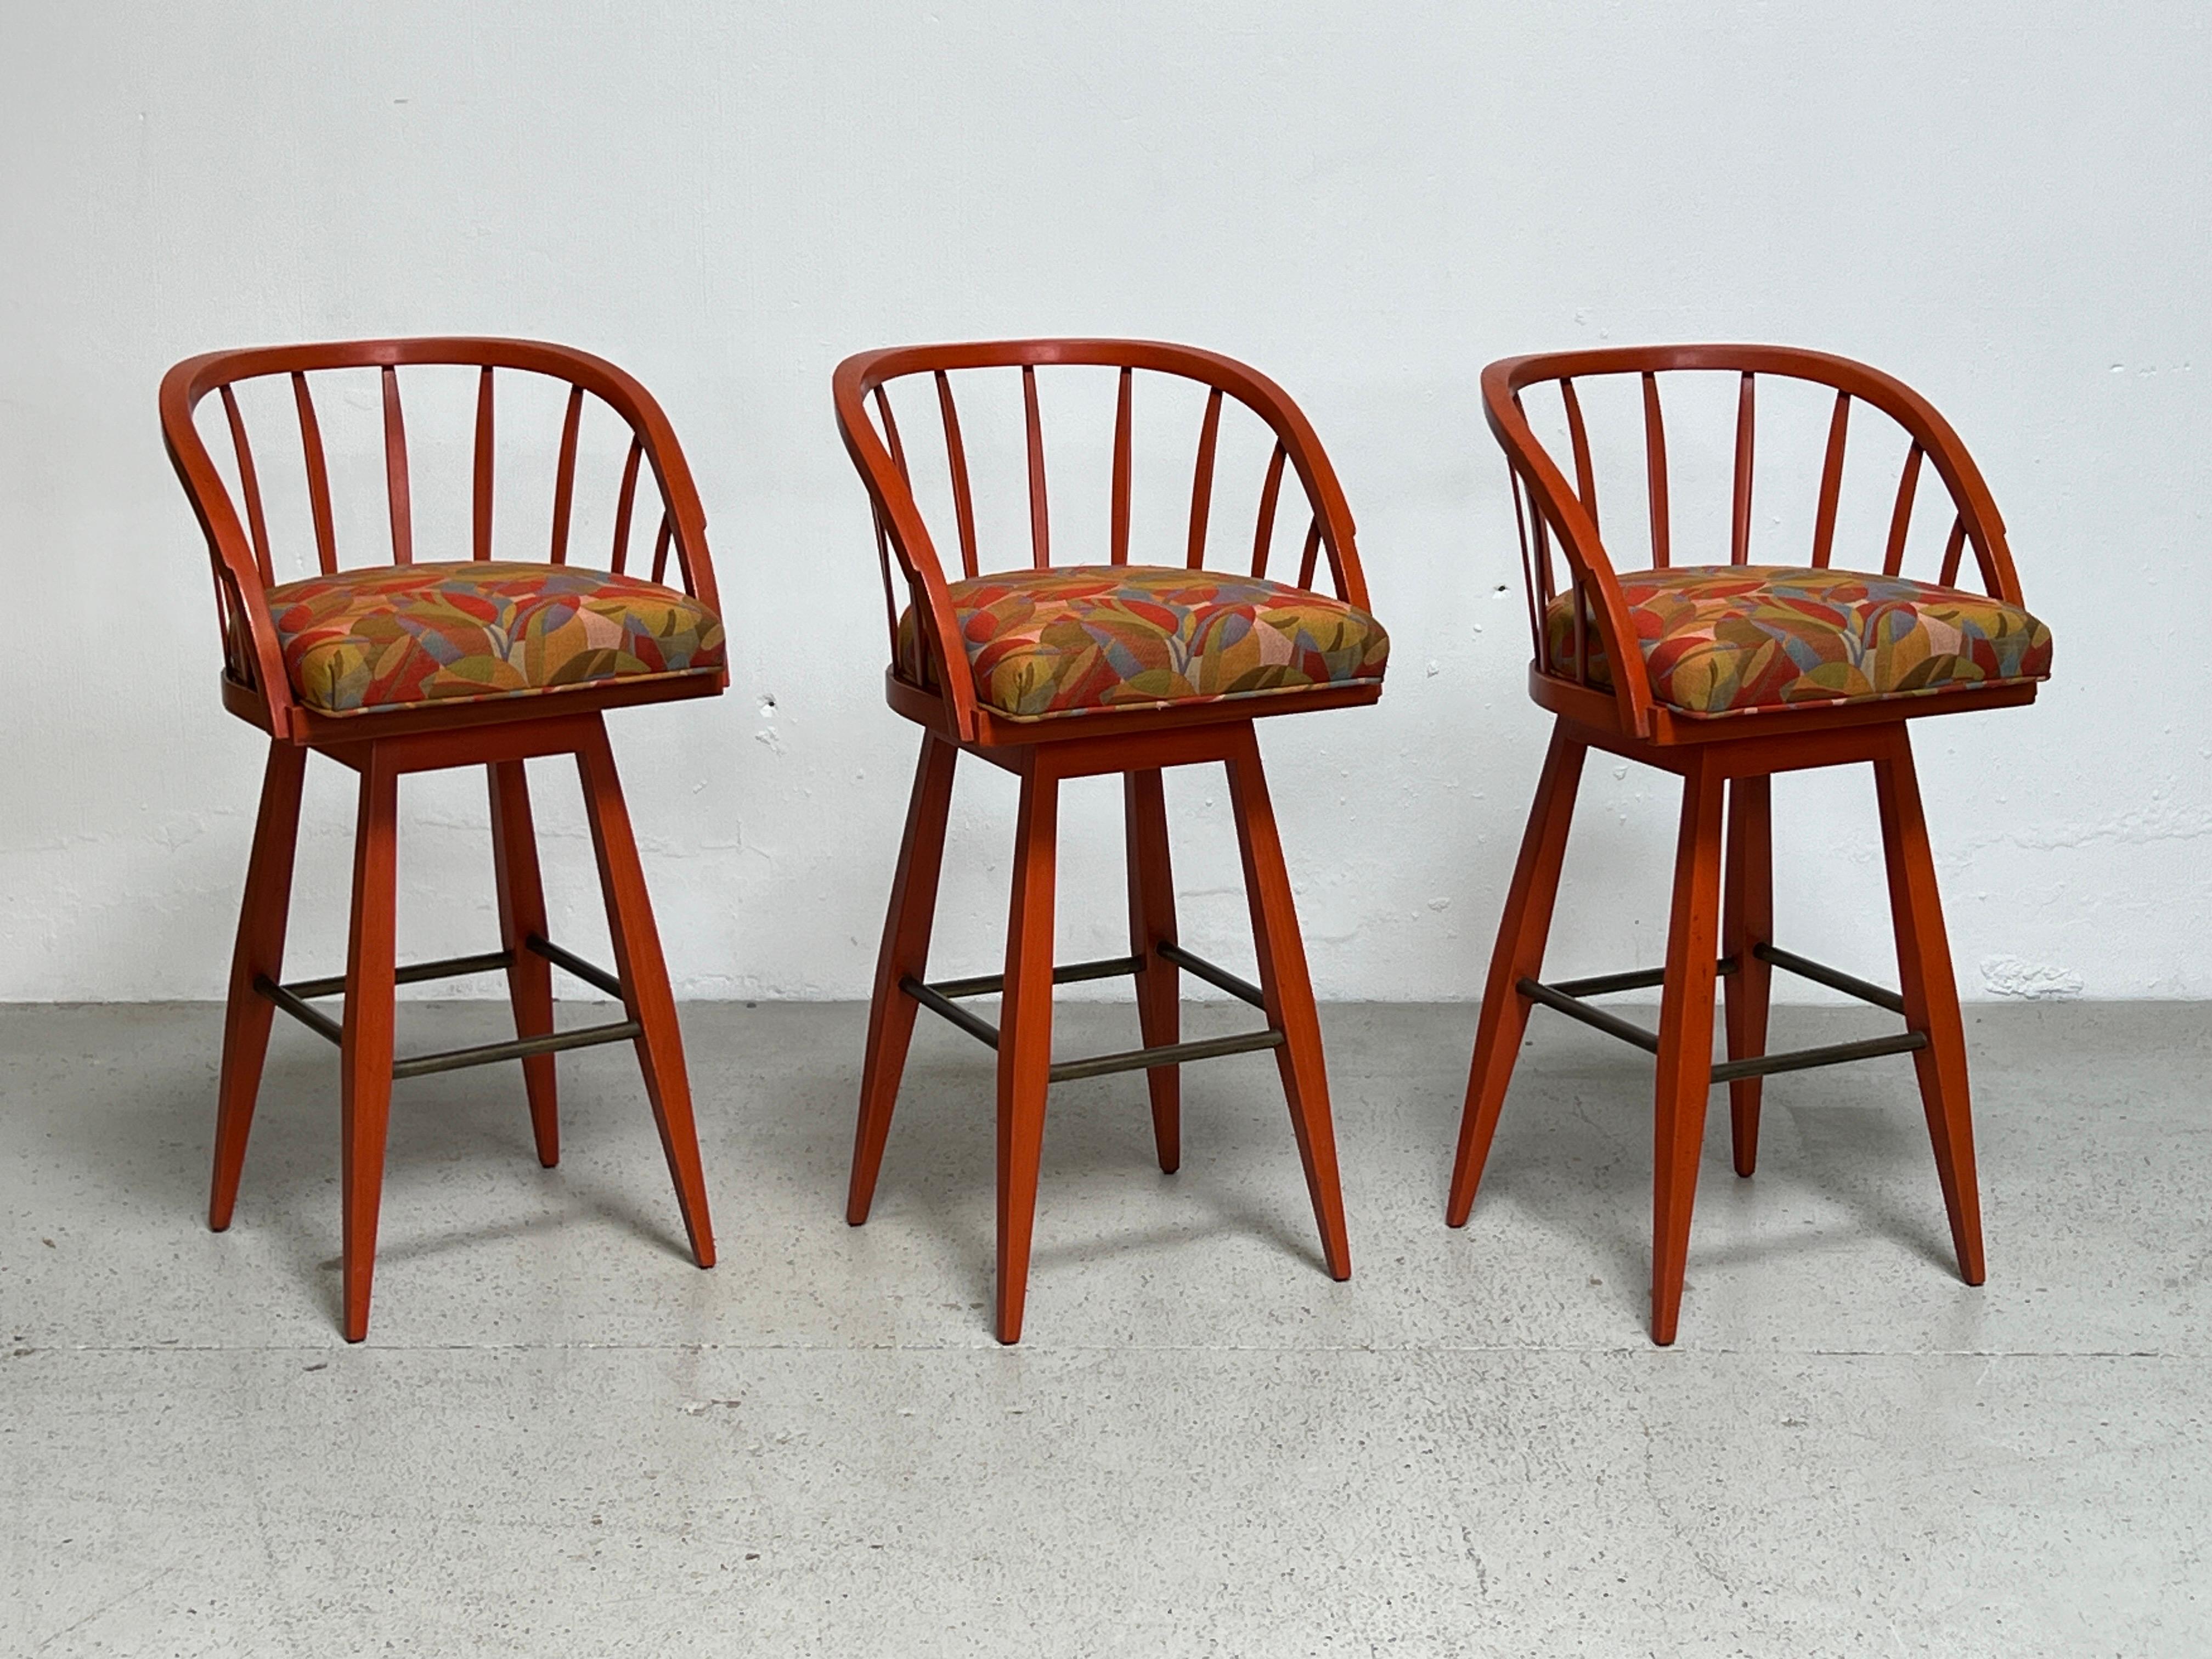 A set of three swiveling barstools designed by Edward Wormley for Dunbar. Original lacquer finish. Reupholstered in vintage Dunbar fabric. 